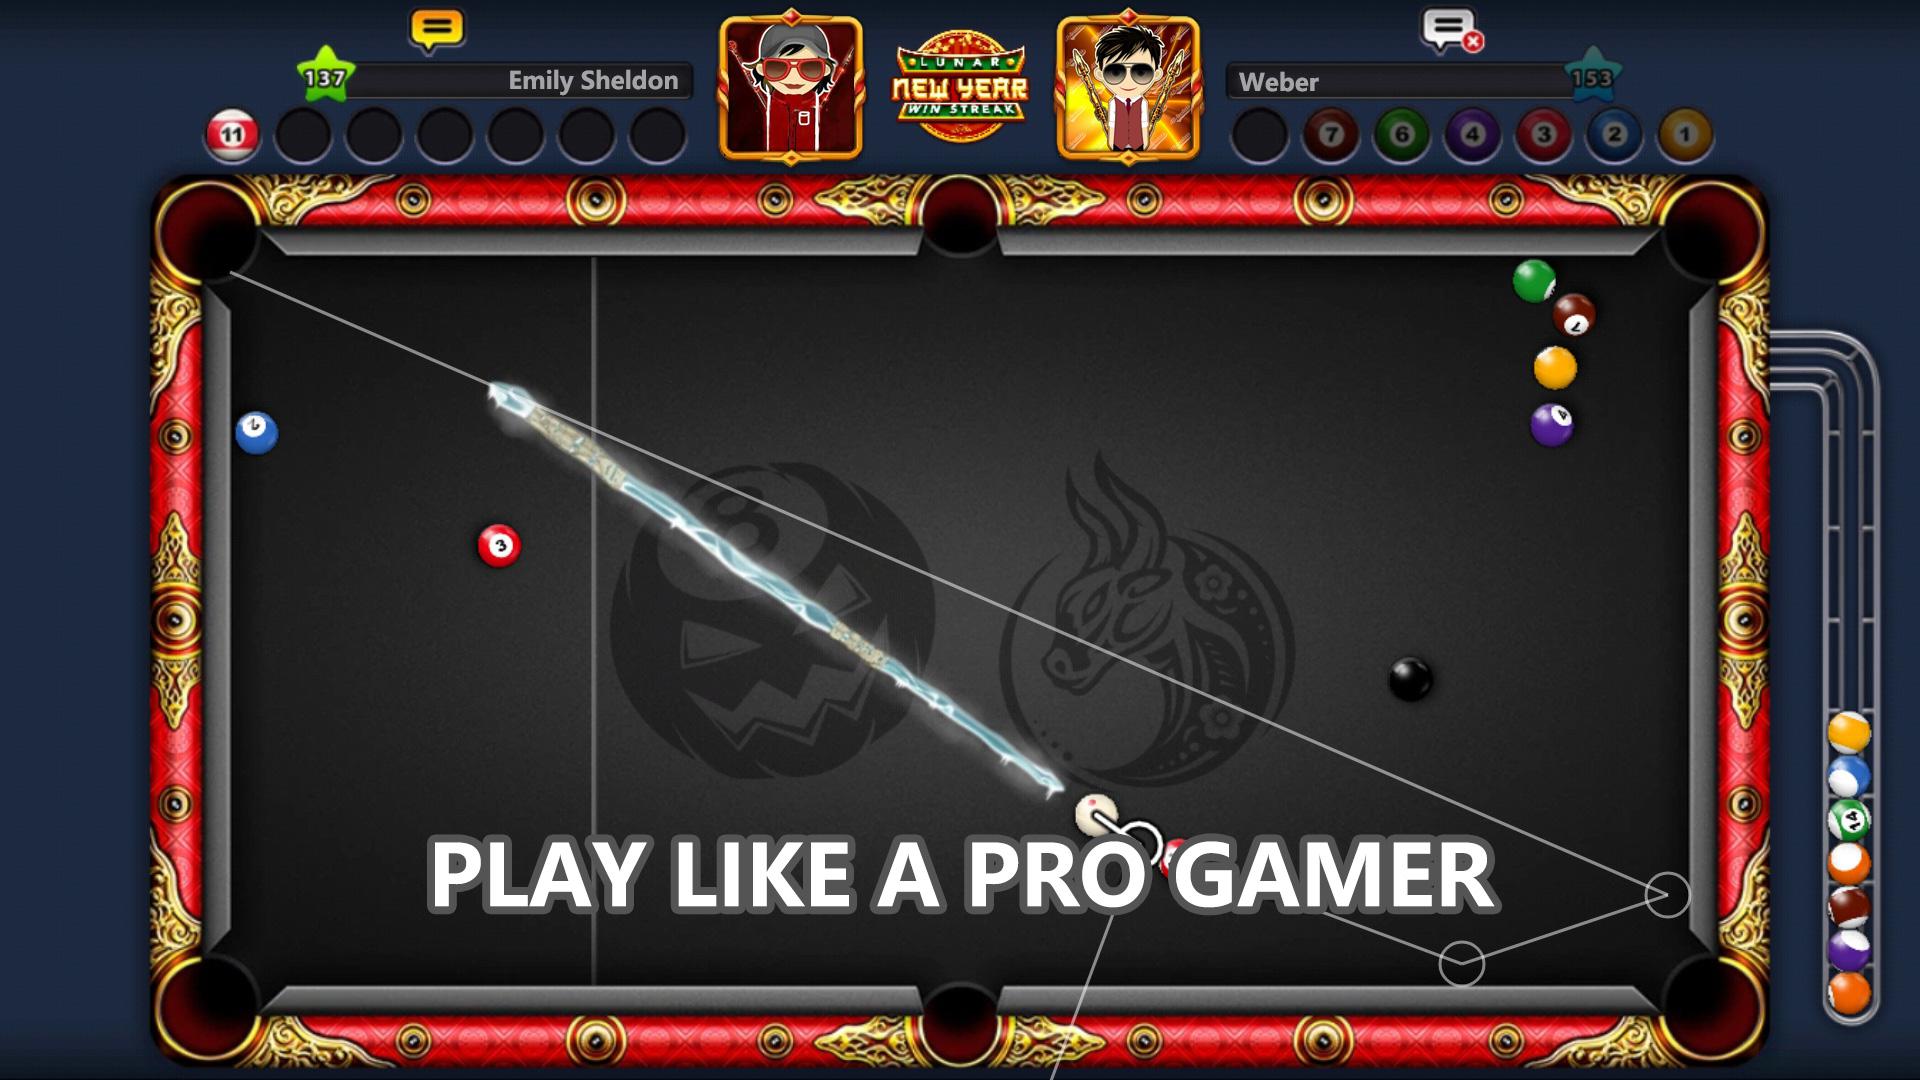 How to download Aim Master for 8 Ball Pool for Android